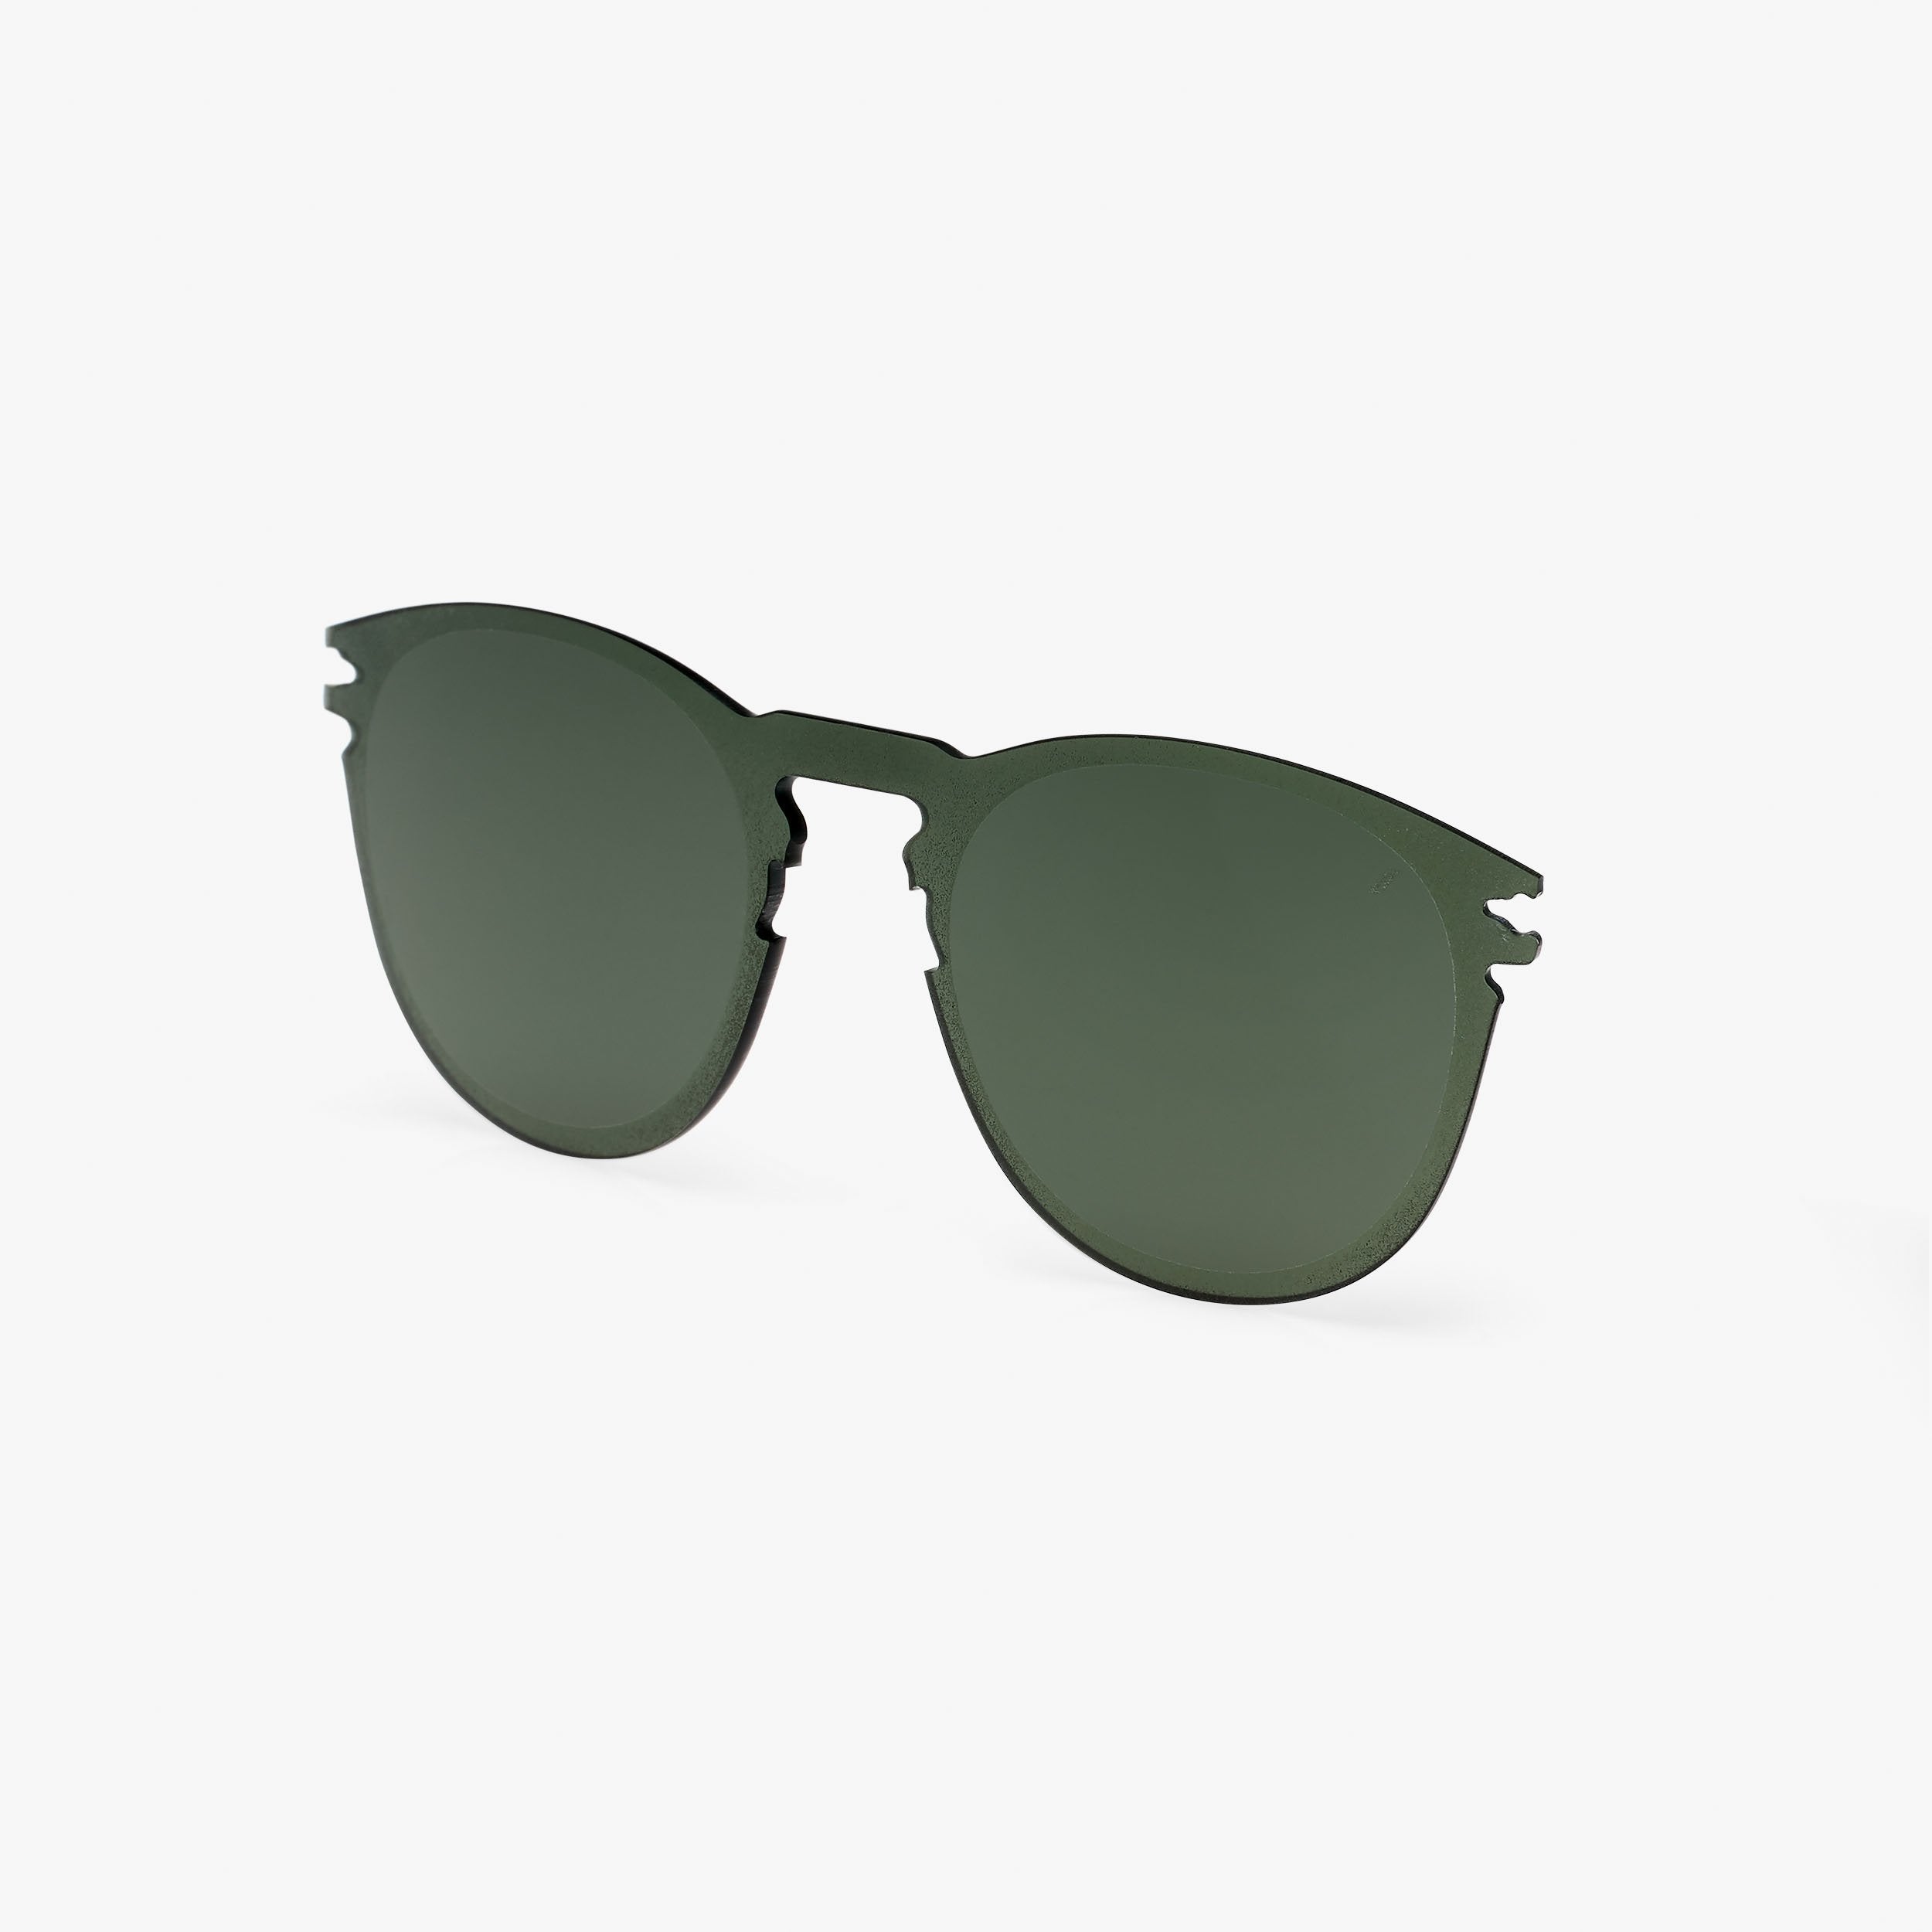 LEGERE ROUND Replacement Lens - Grey Green